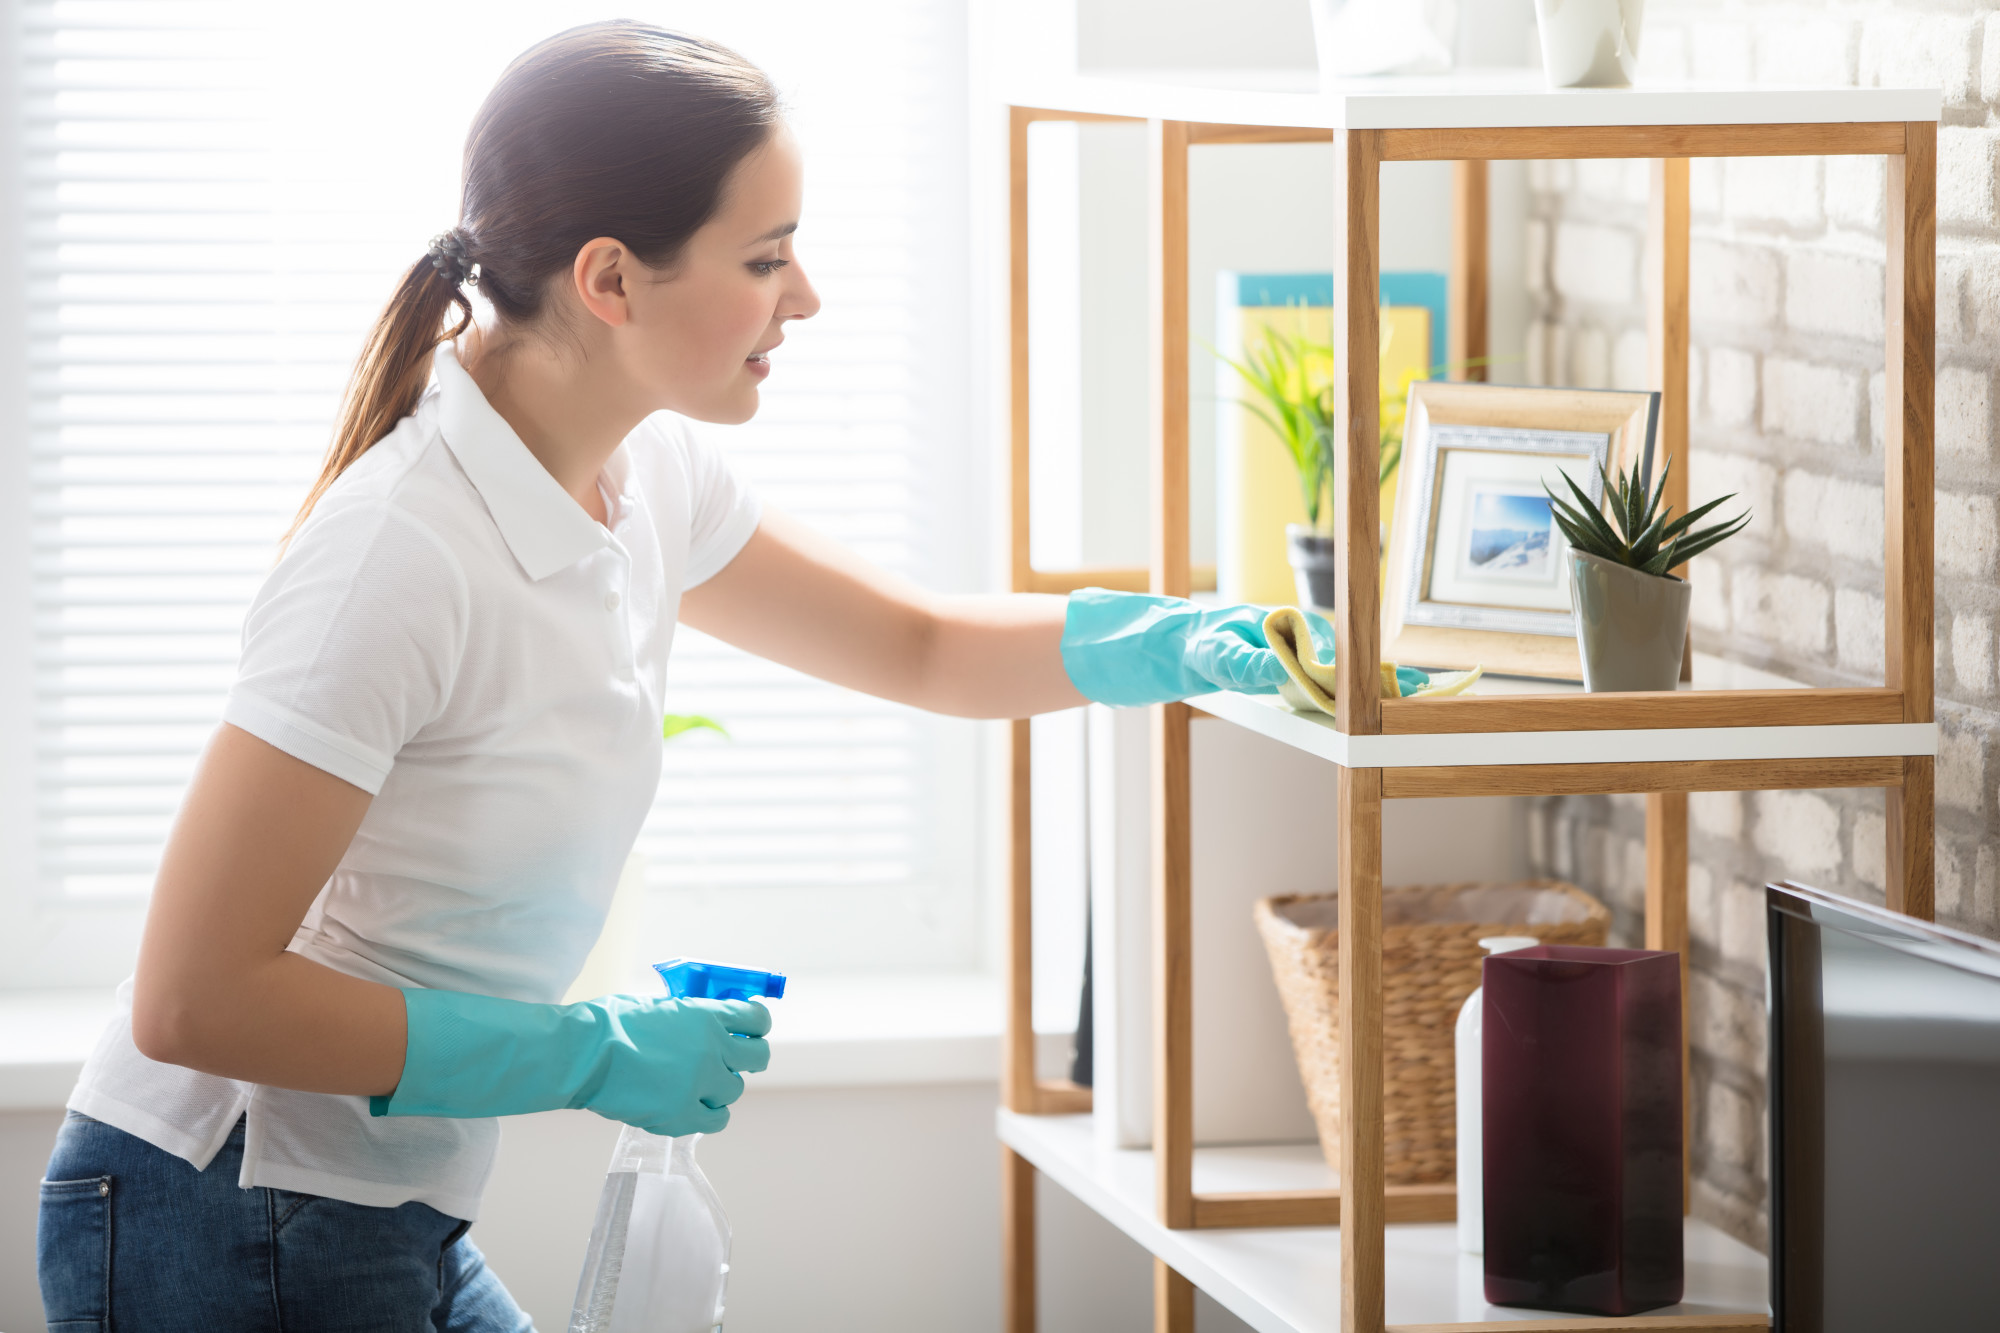 Keeping it Clean: 9 Things You Should Really be Cleaning Every Day